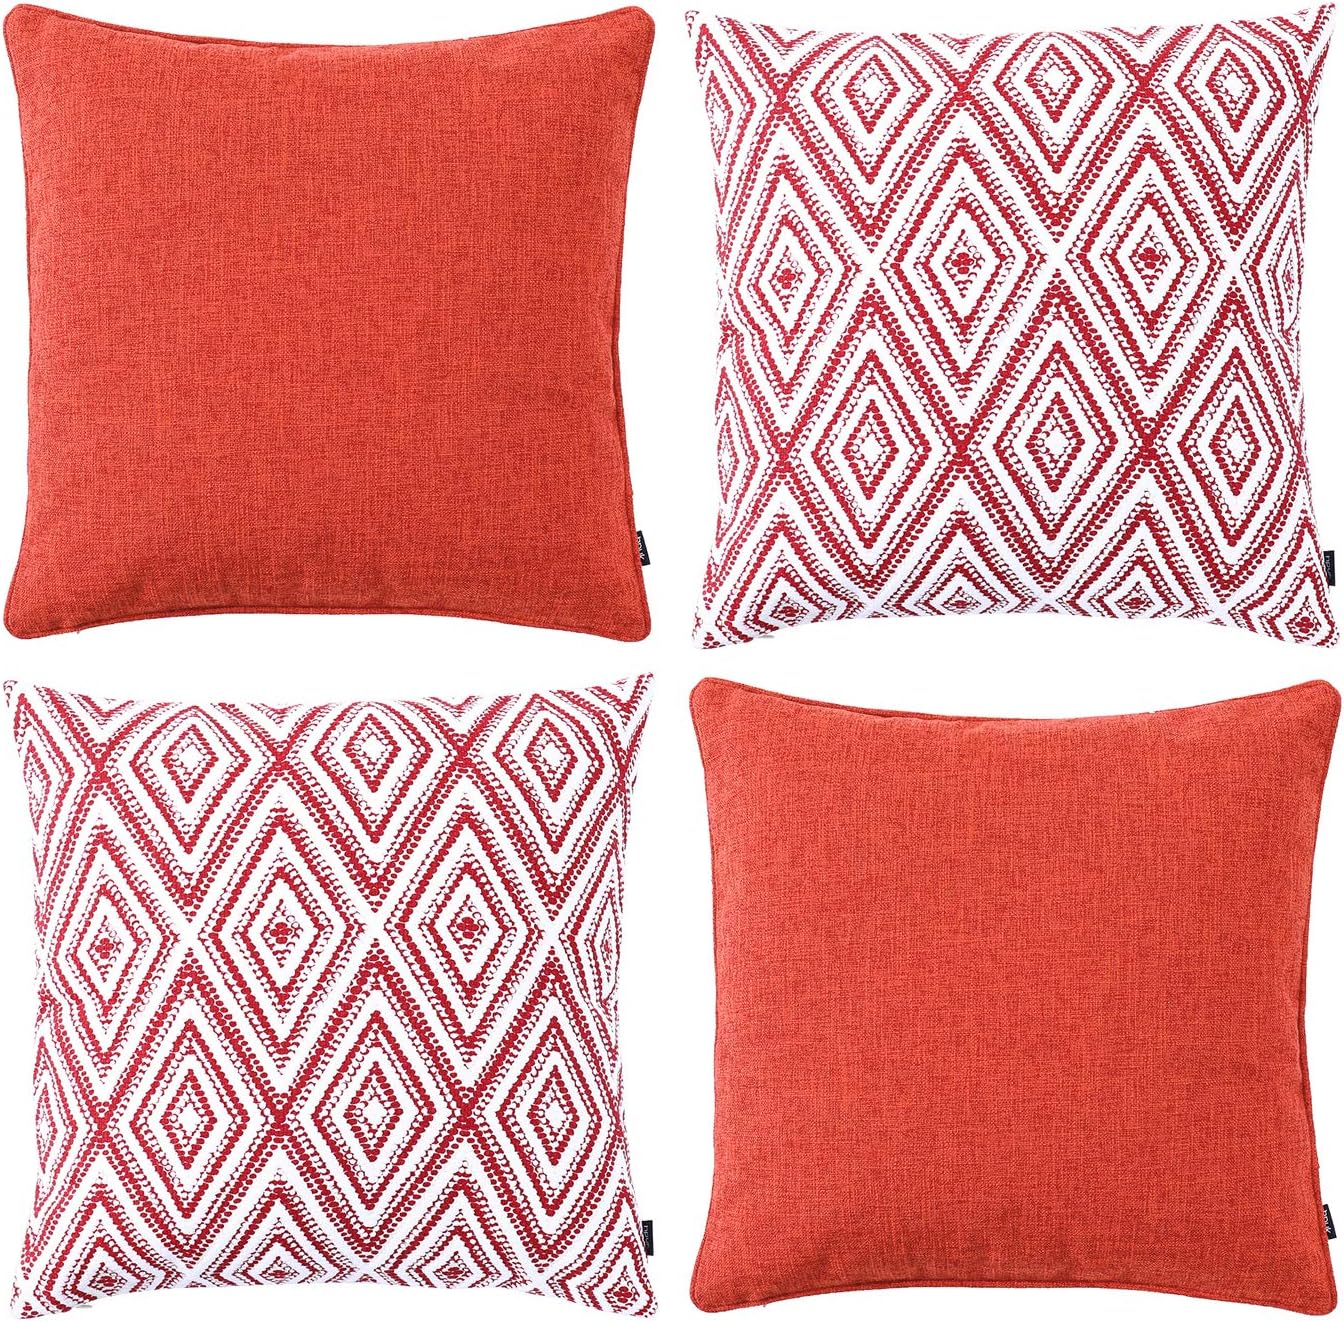 HPUK Decorative Throw Pillow Covers Set of 4 Geometric Design Linen Cushion Cover for Couch Sofa Living Room, 18x18 inches, Red Clay